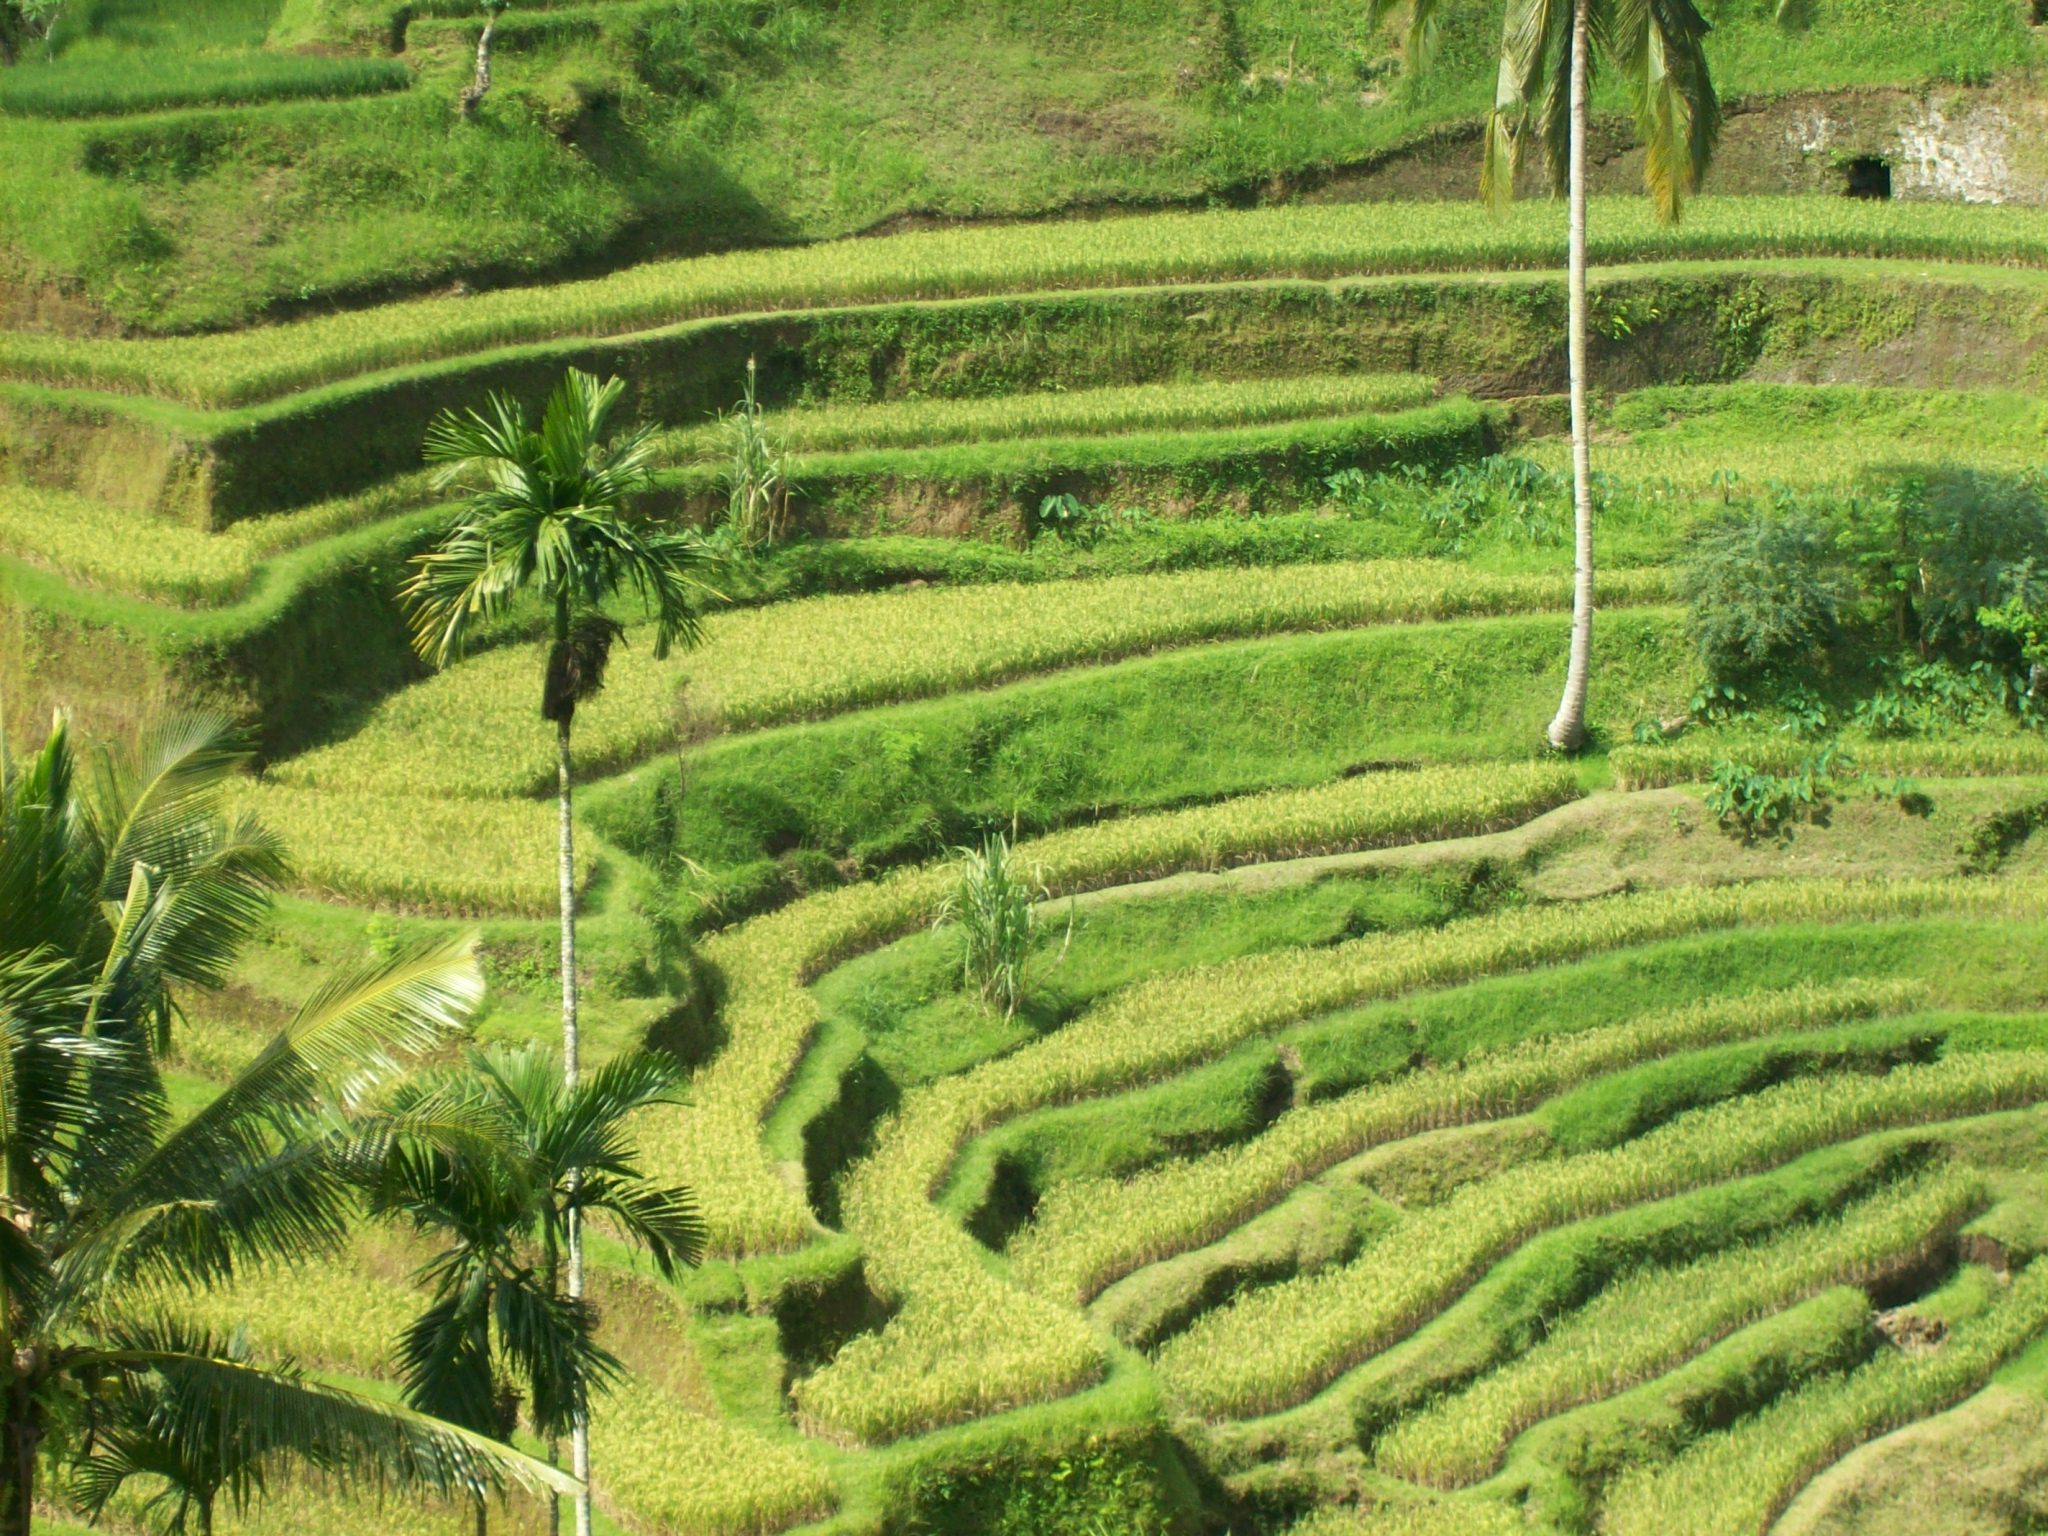 Download this Ubud Rice Fields picture